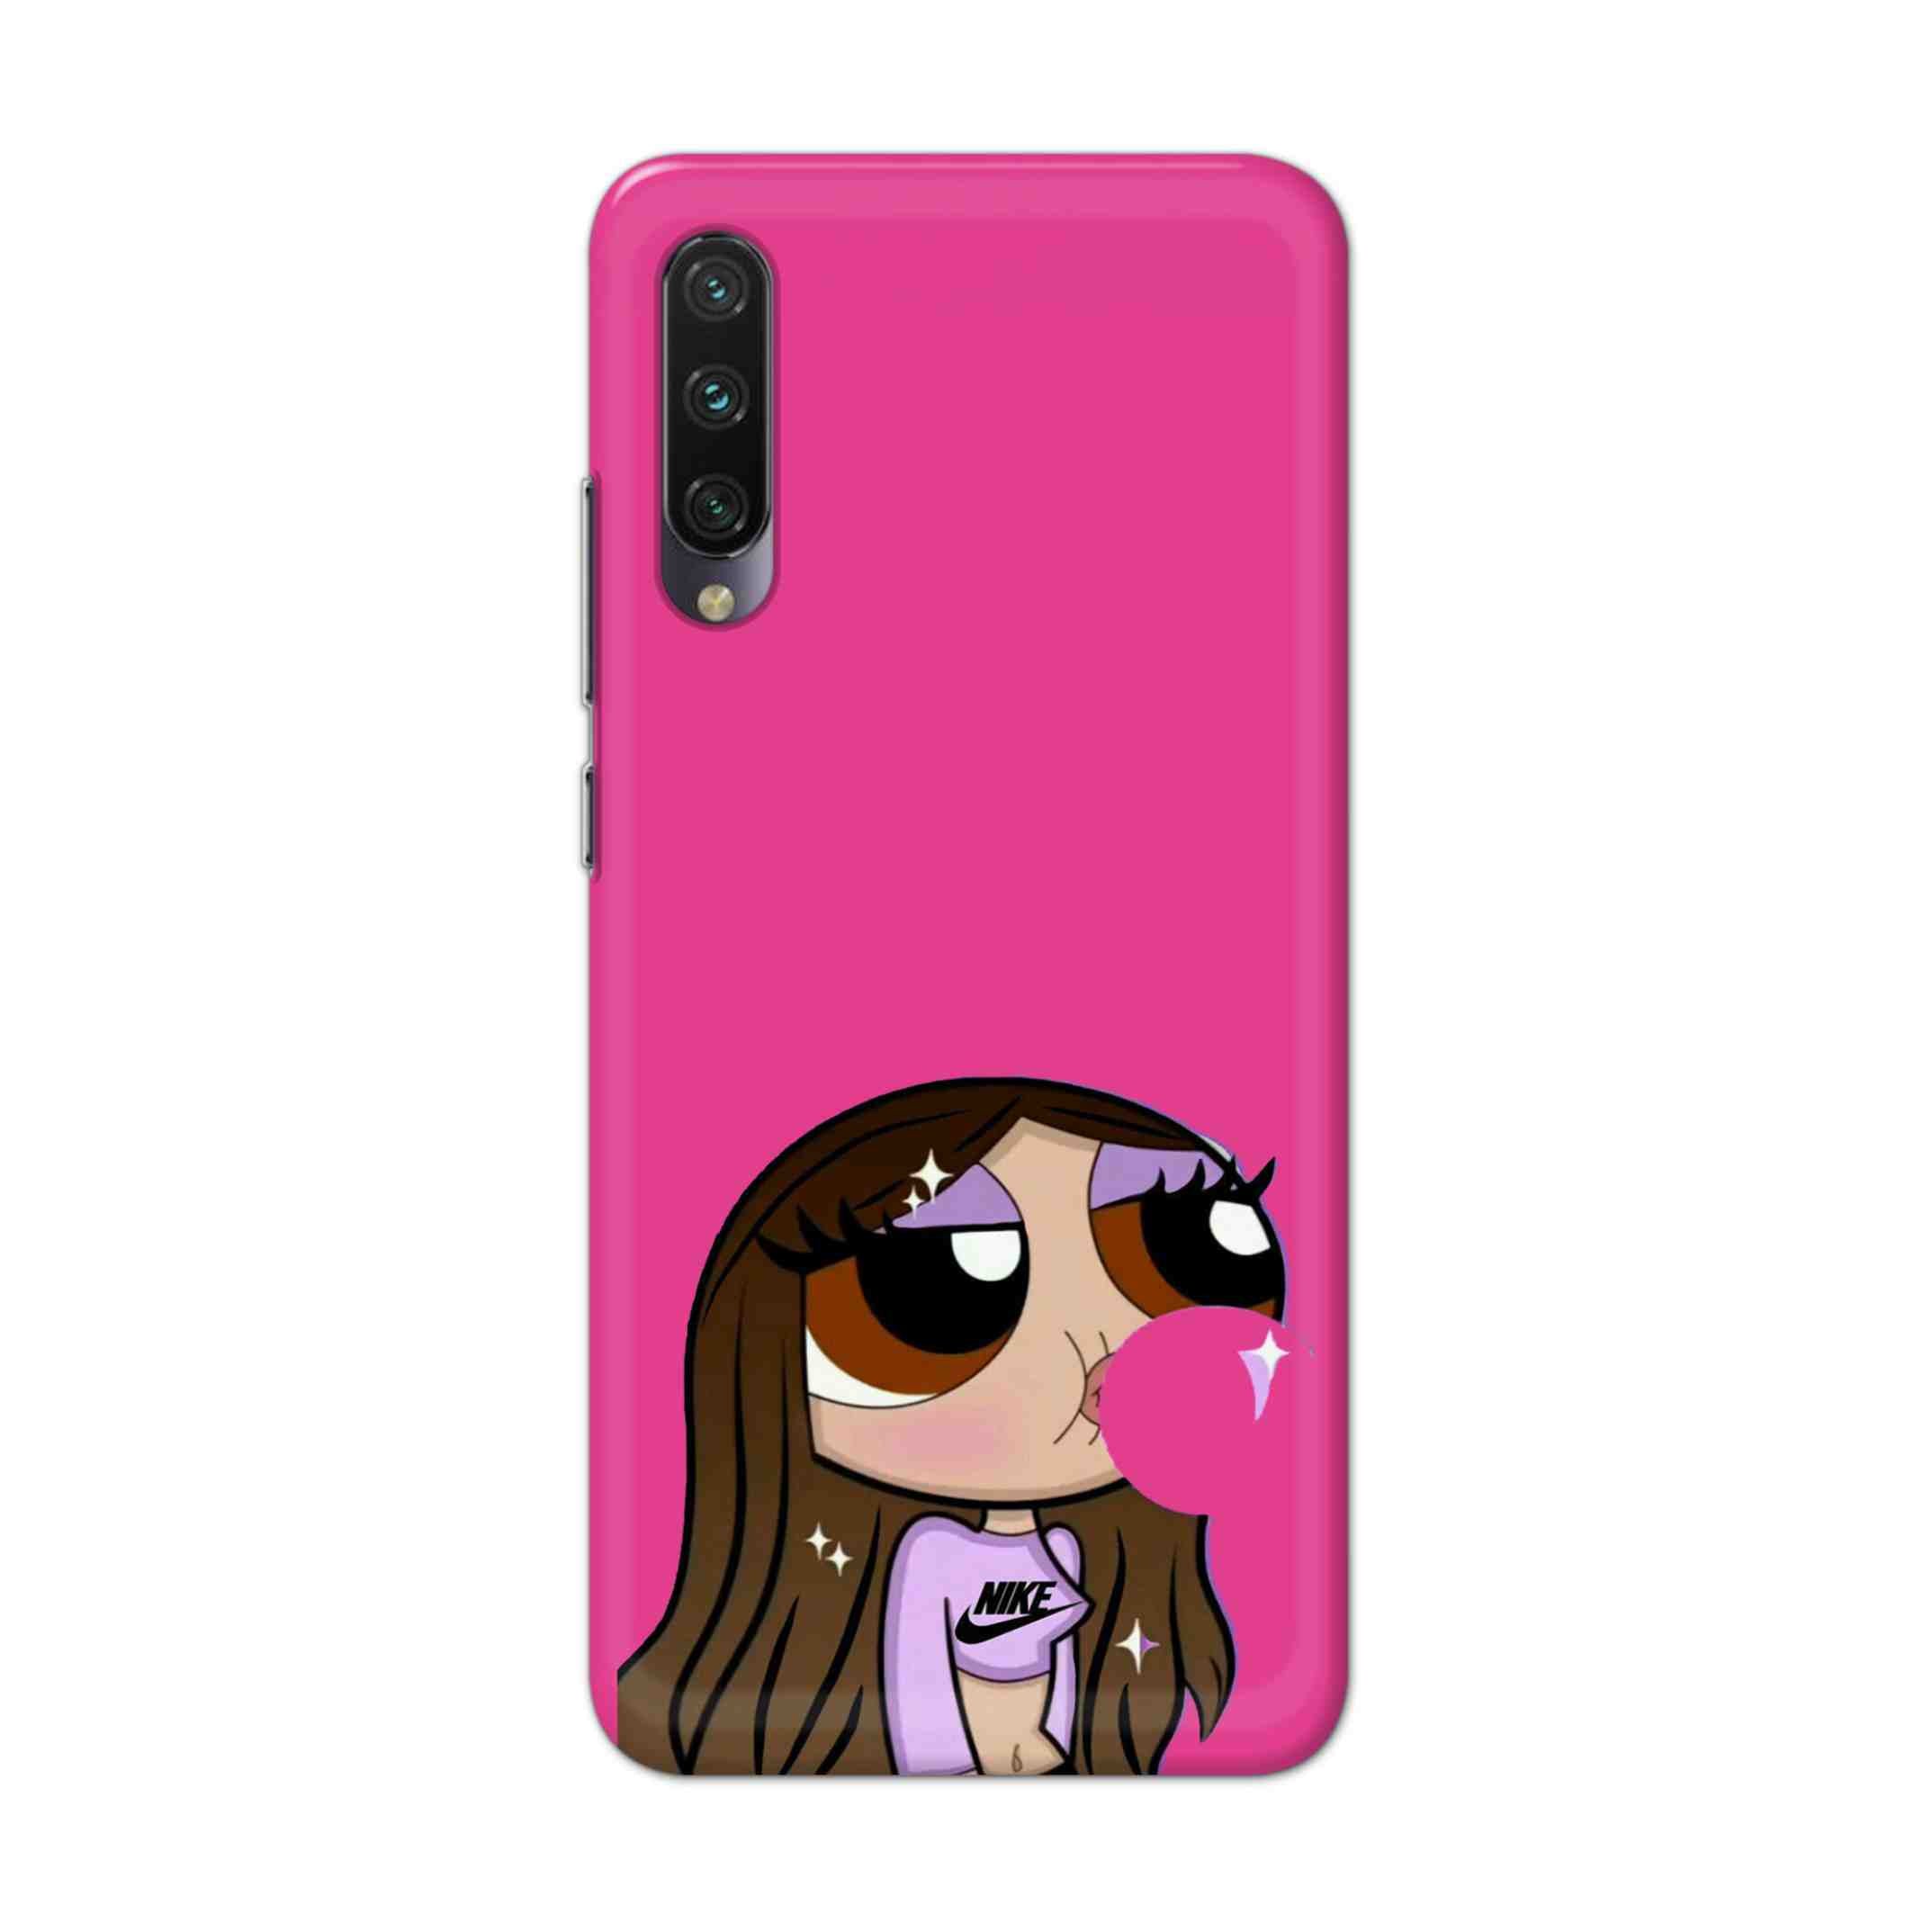 Buy Bubble Girl Hard Back Mobile Phone Case Cover For Xiaomi Mi A3 Online